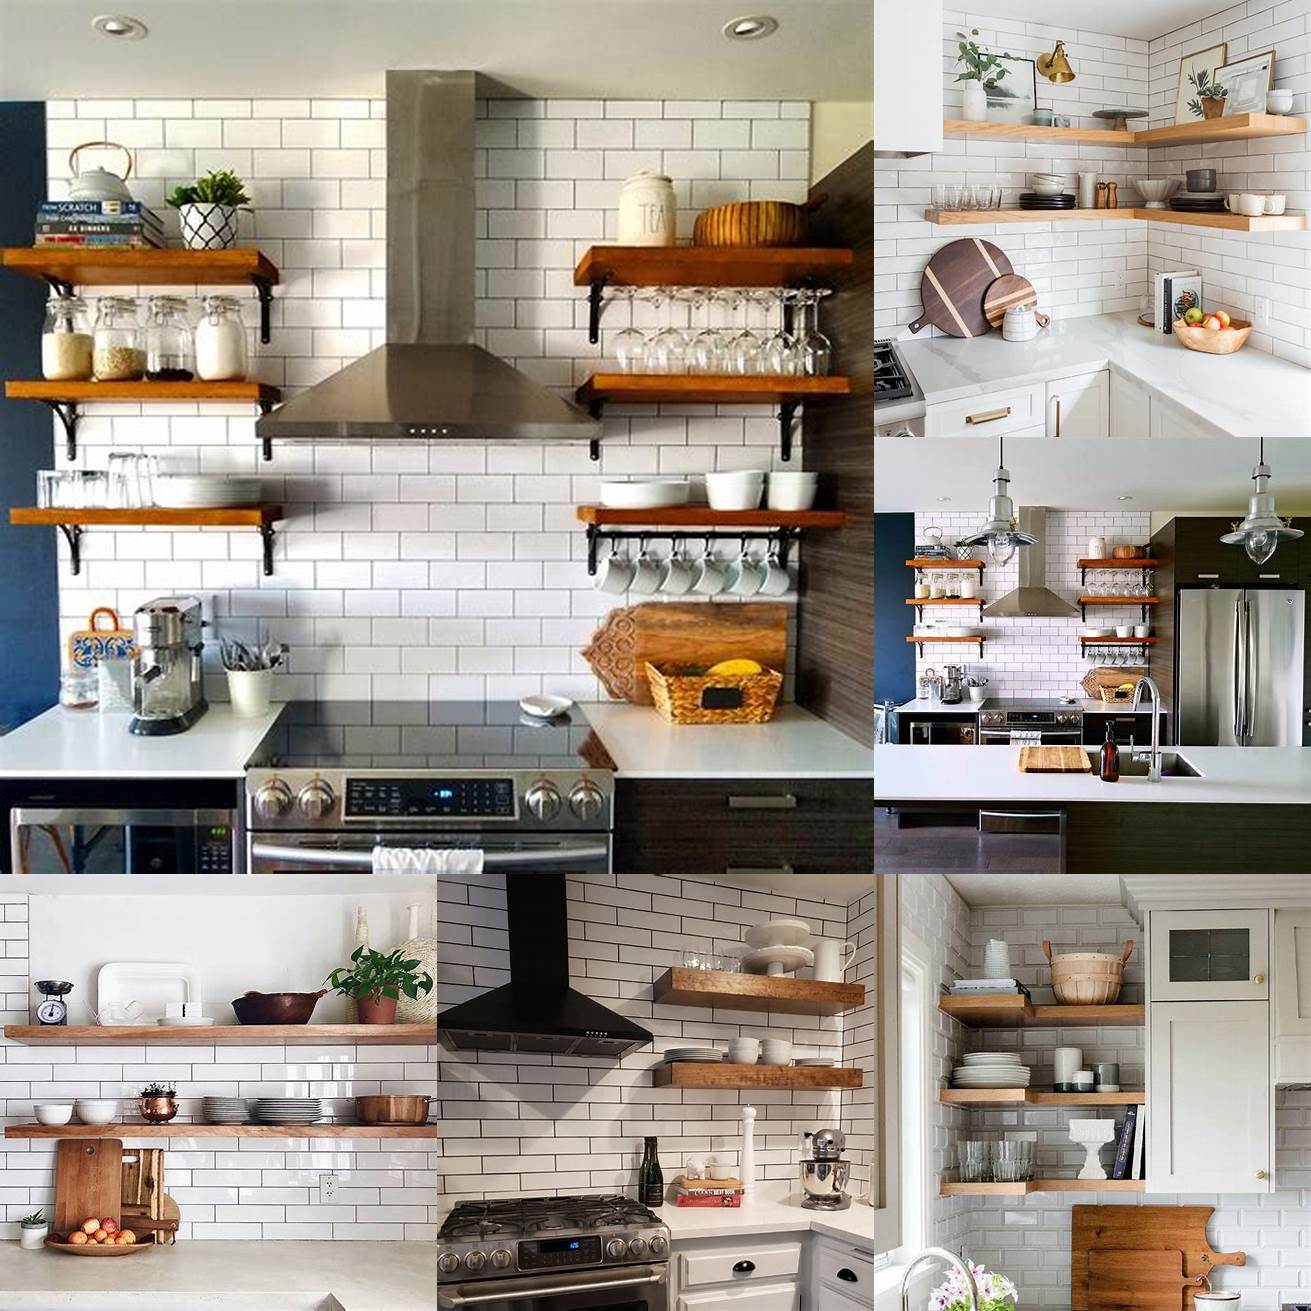 5 Subway Tile Kitchen with Open Shelving